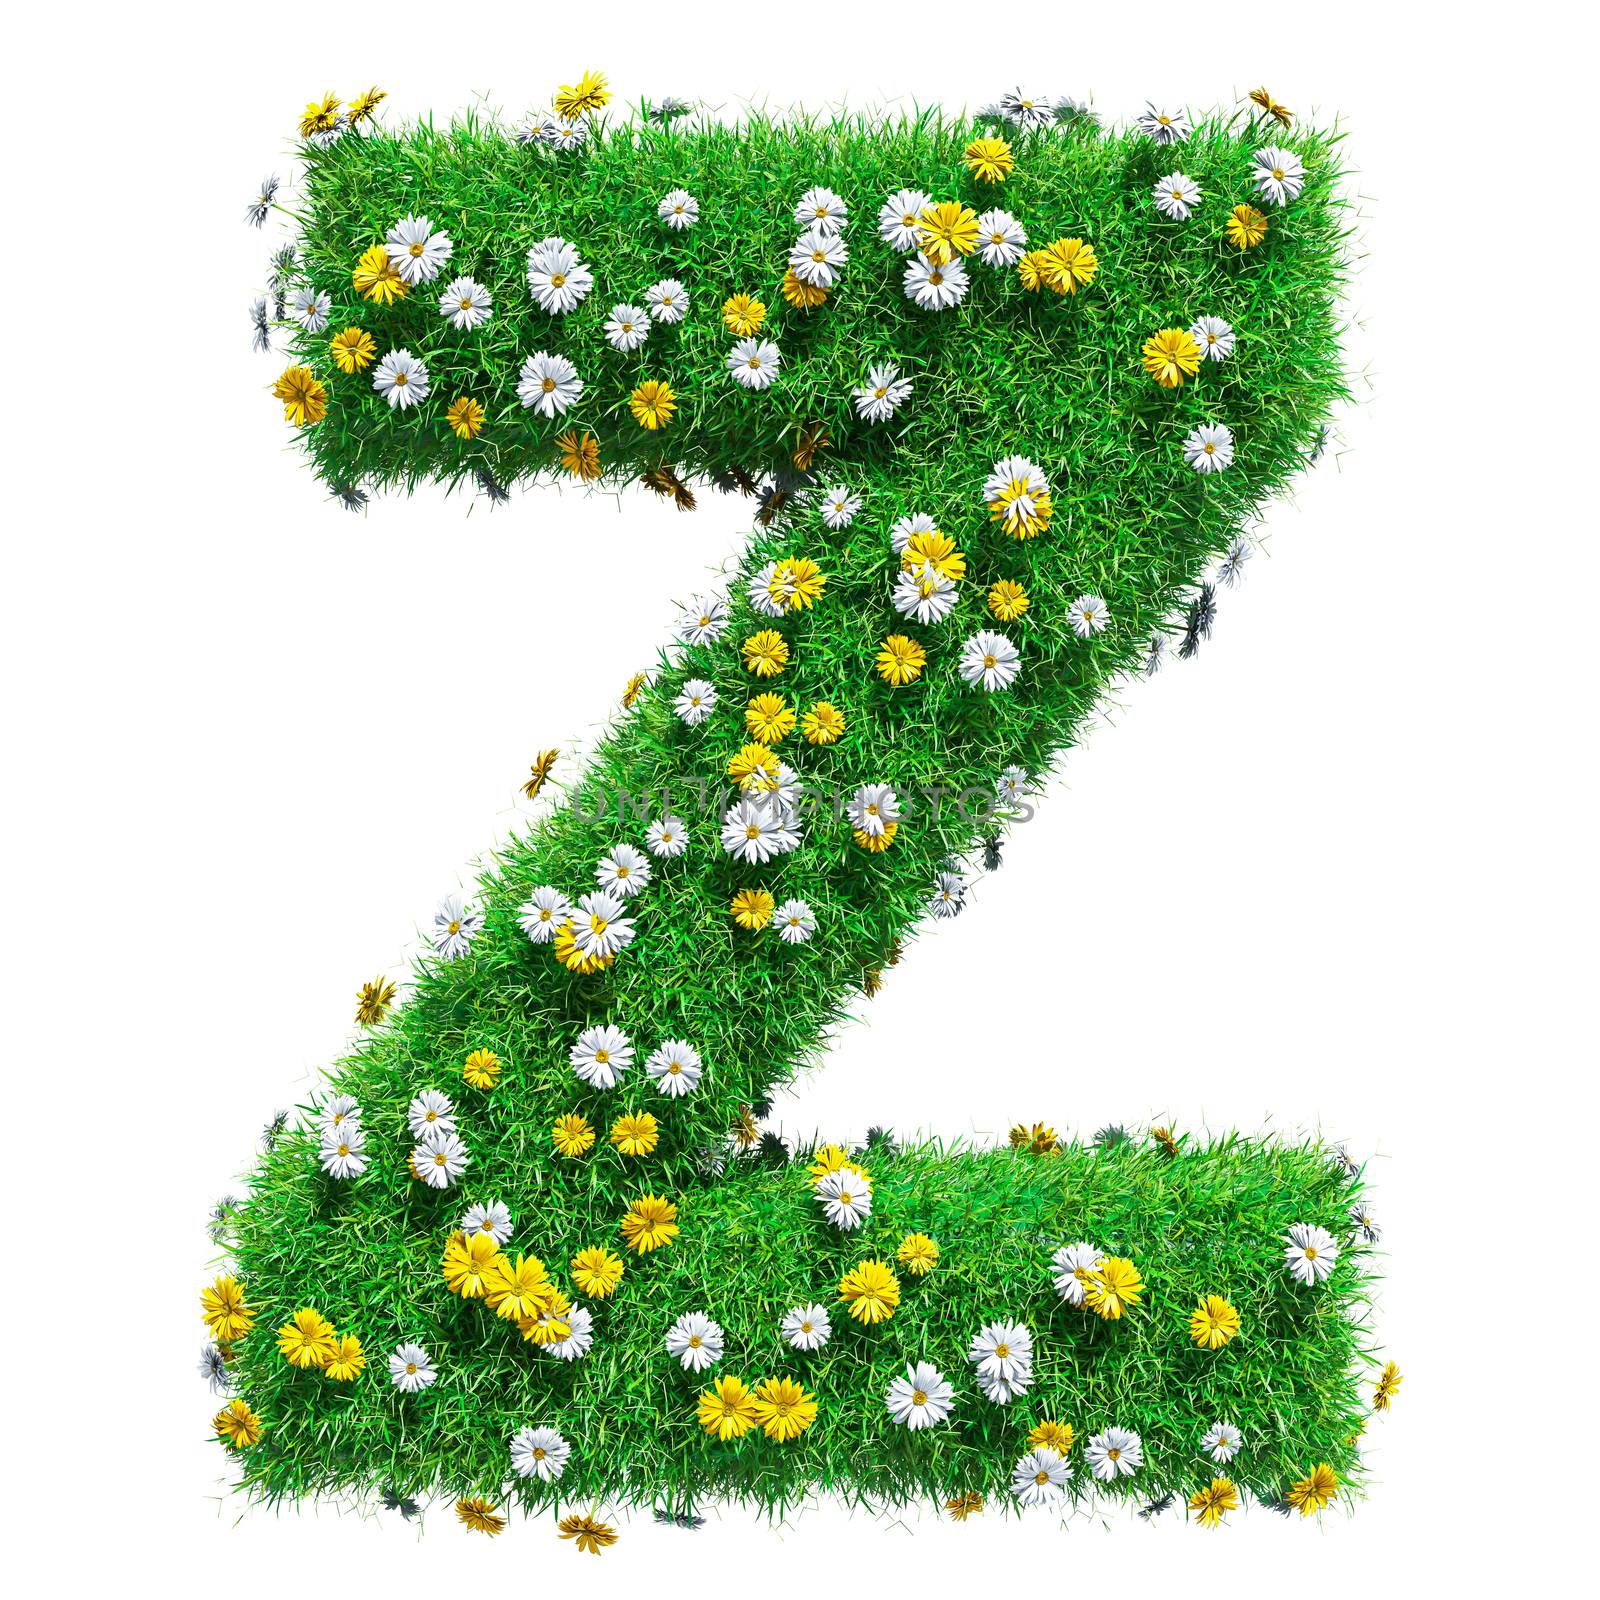 Letter Z Of Green Grass And Flowers. Isolated On White Background. Font For Your Design. 3D Illustration